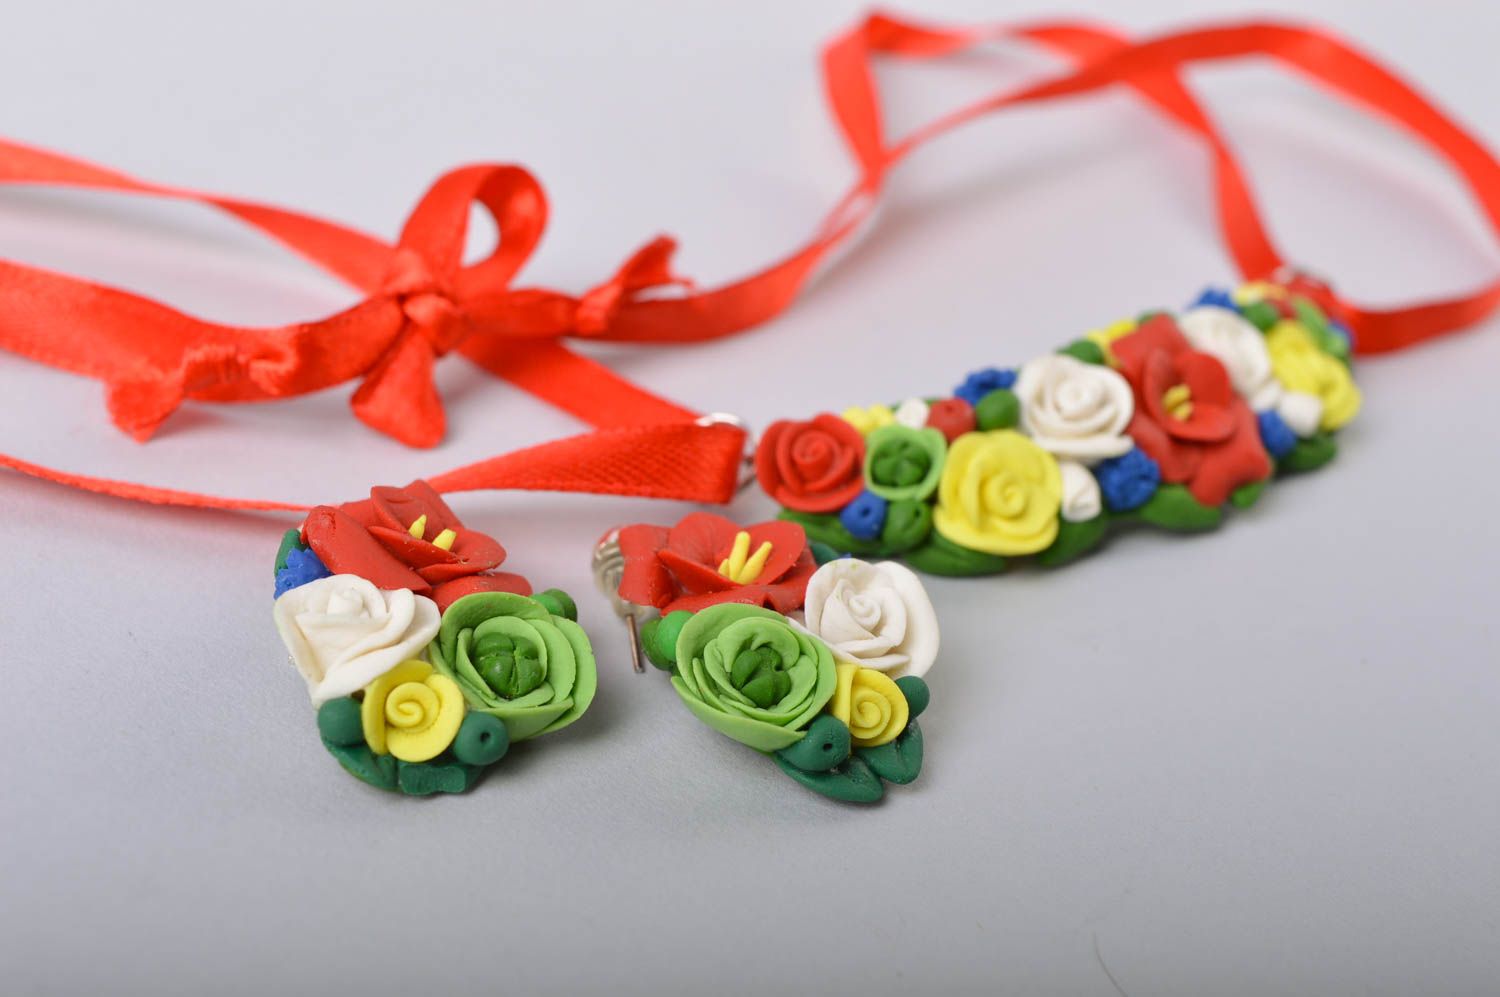 Handmade colorful floral cold porcelain jewelry set earrings and necklace photo 4